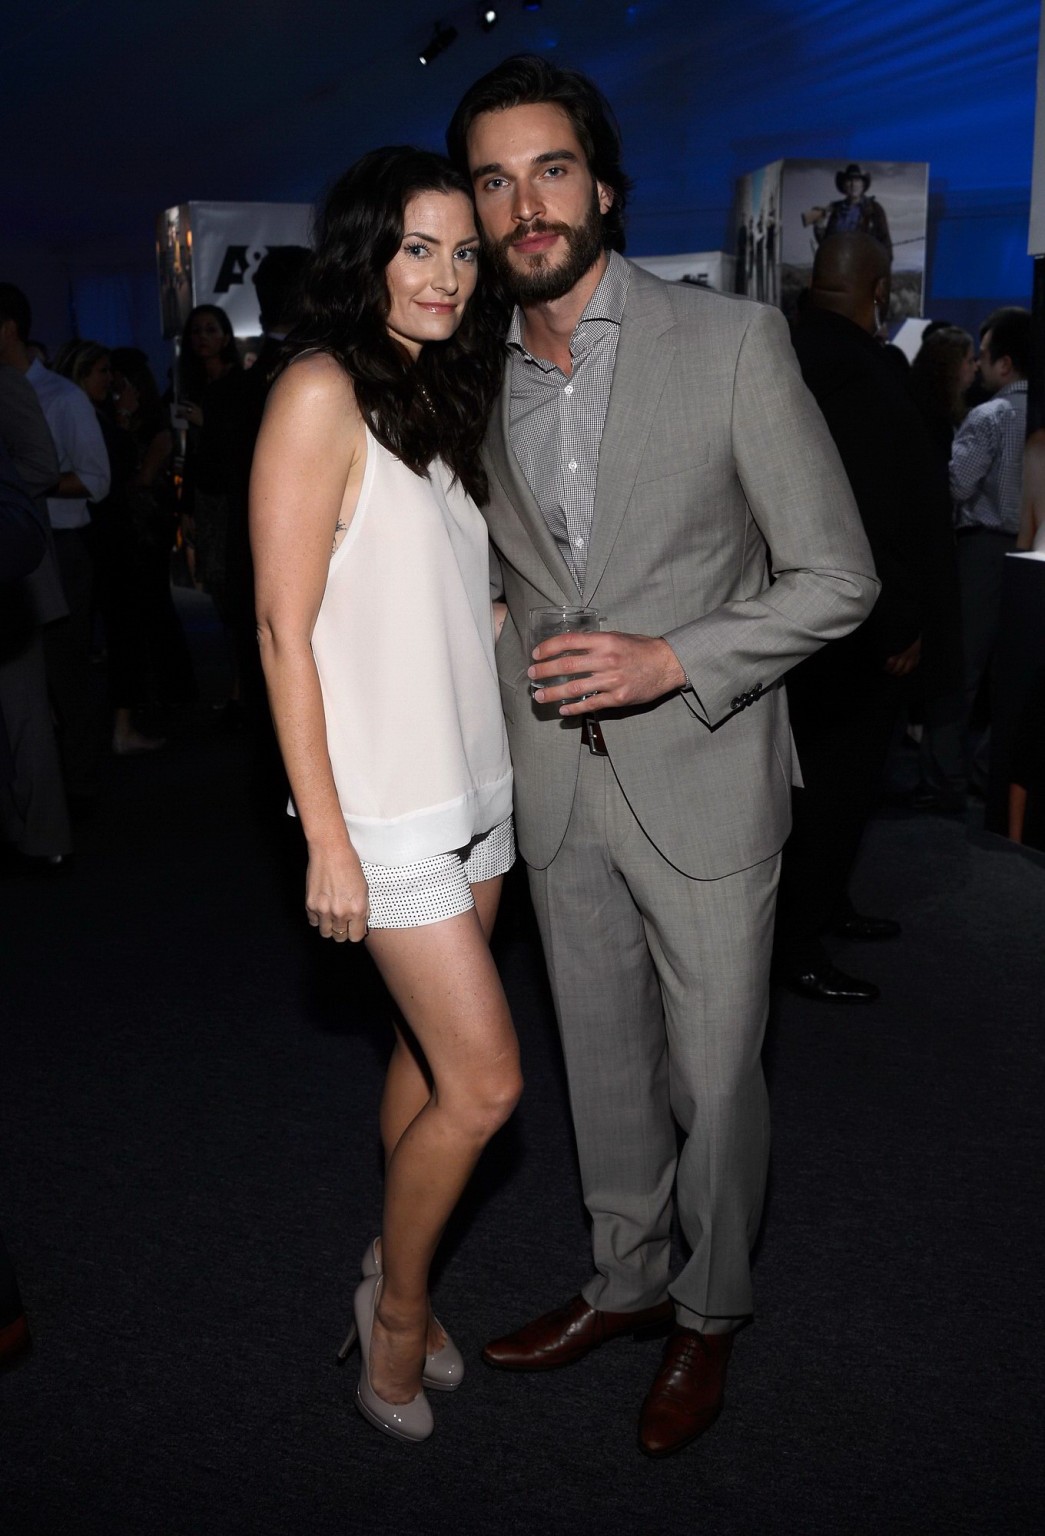 Madchen amick leggy tragen shorts bei der a e networks upfront in nyc
 #75232625